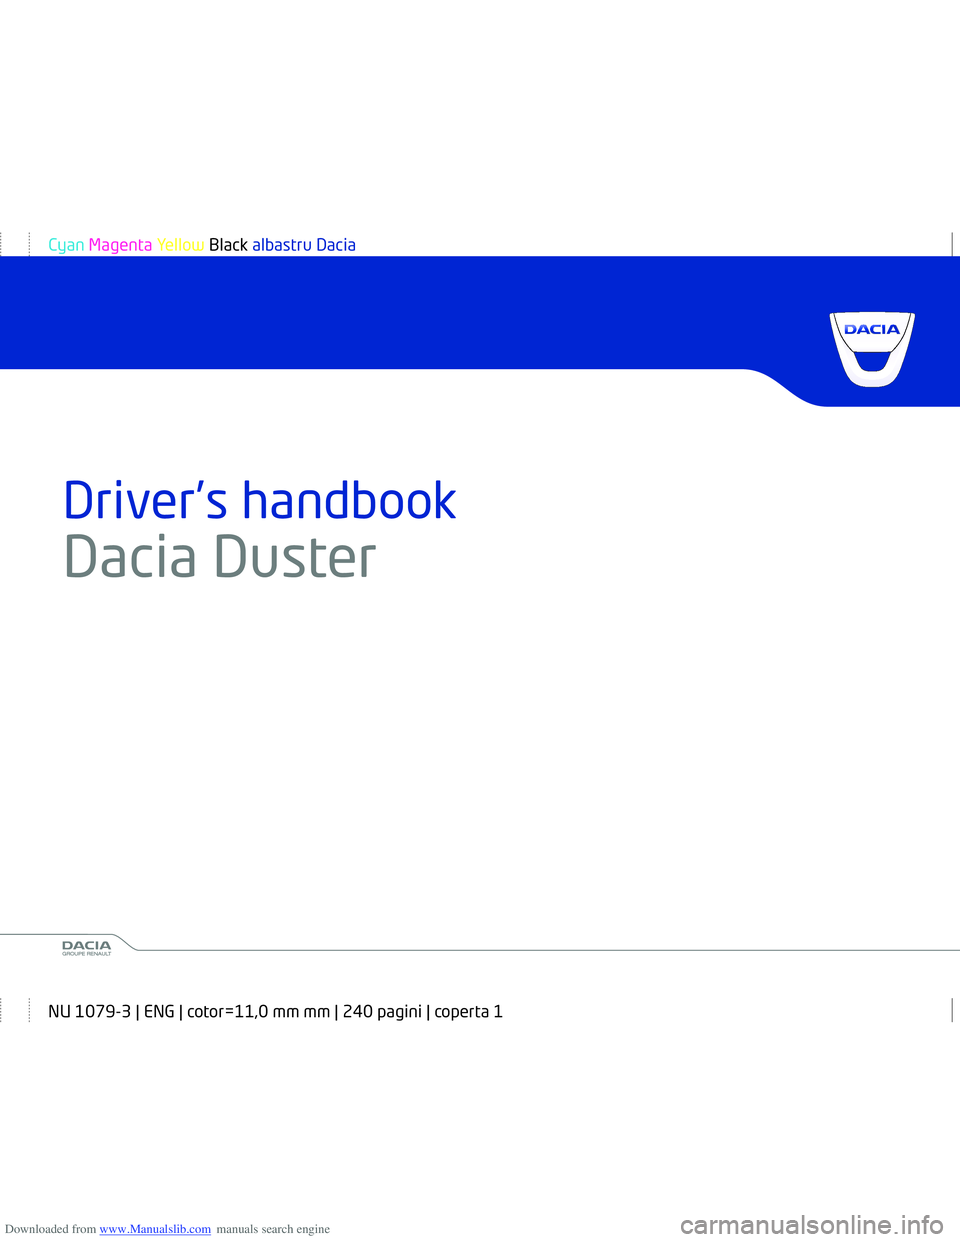 DACIA DUSTER 2011  Owners Manual Downloaded from www.Manualslib.com manuals search engine www.daciagroup.com
Driver’s handbook
Dacia  Duster        
Ref 999101781R / édition anglaiseNU 1079-3 - 07/2014
Cyan Magenta Yellow Black al